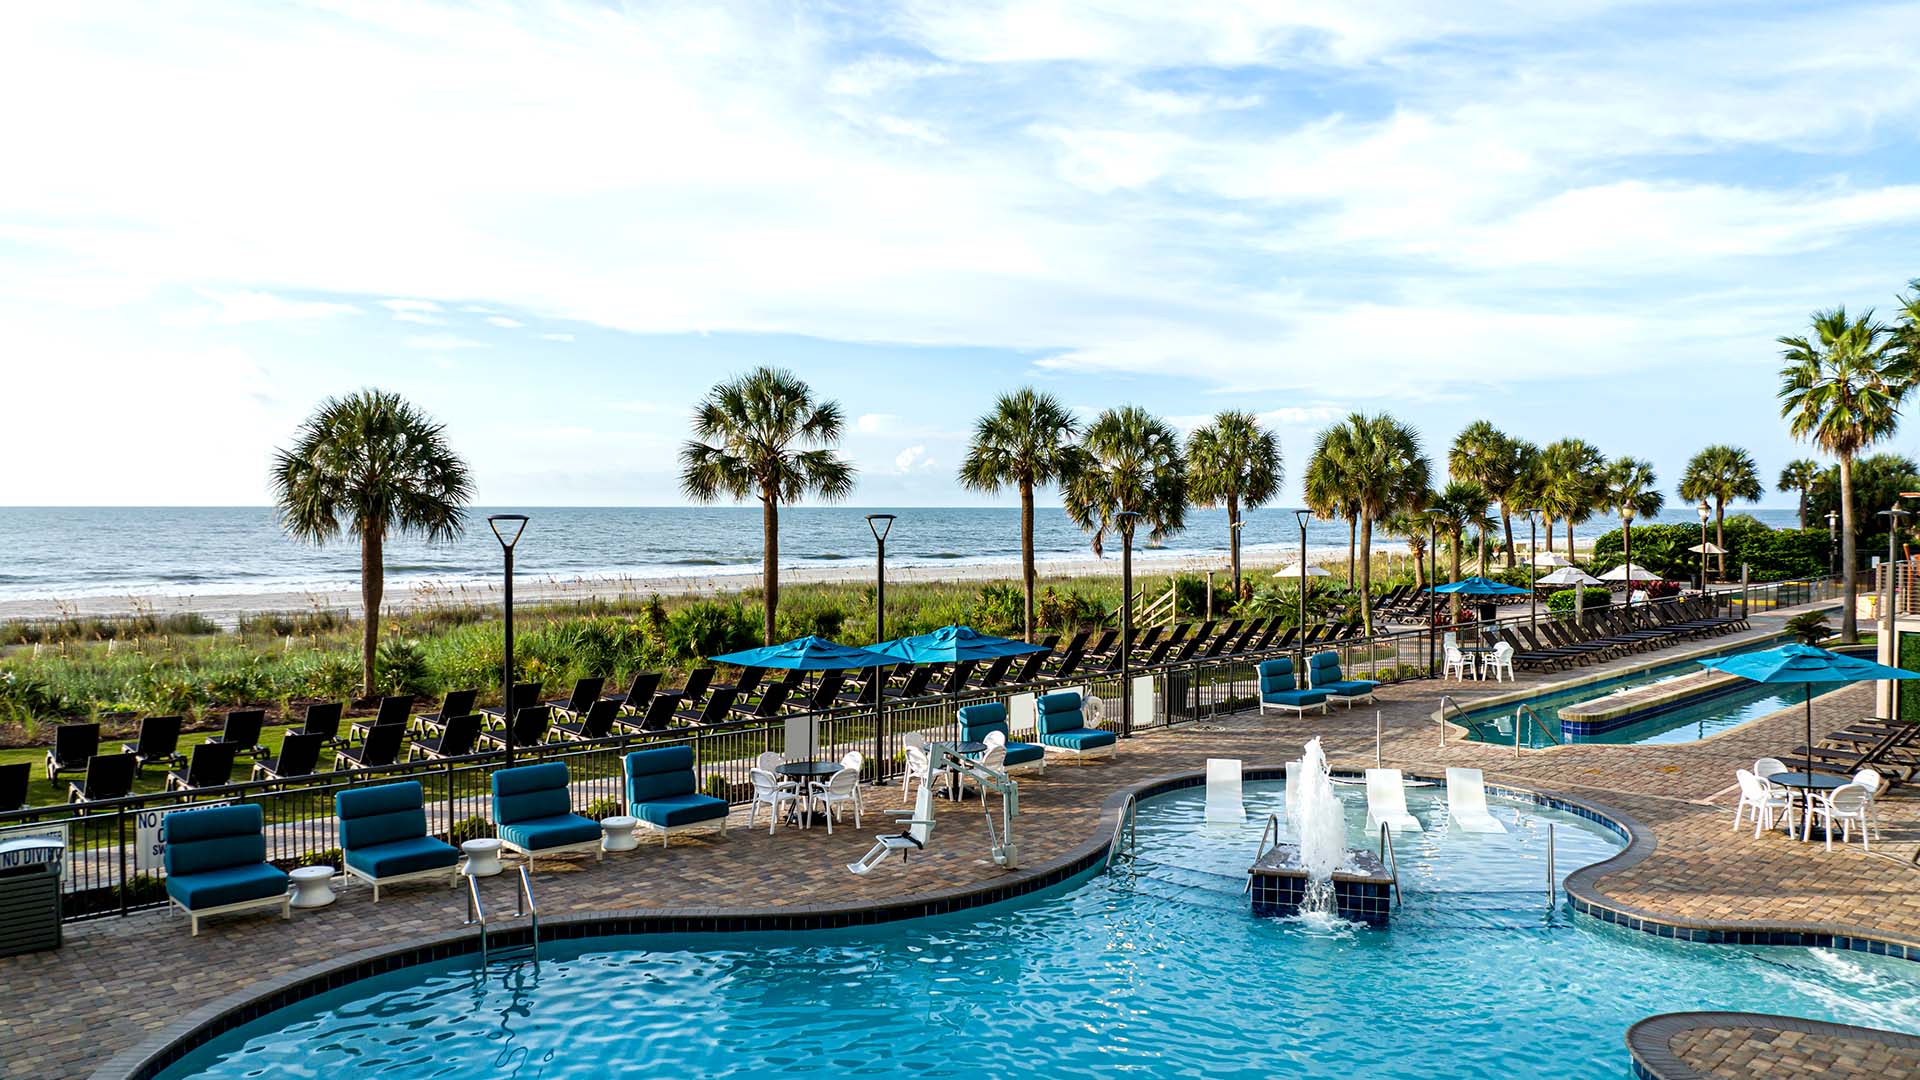 A pool in Myrtle Beach